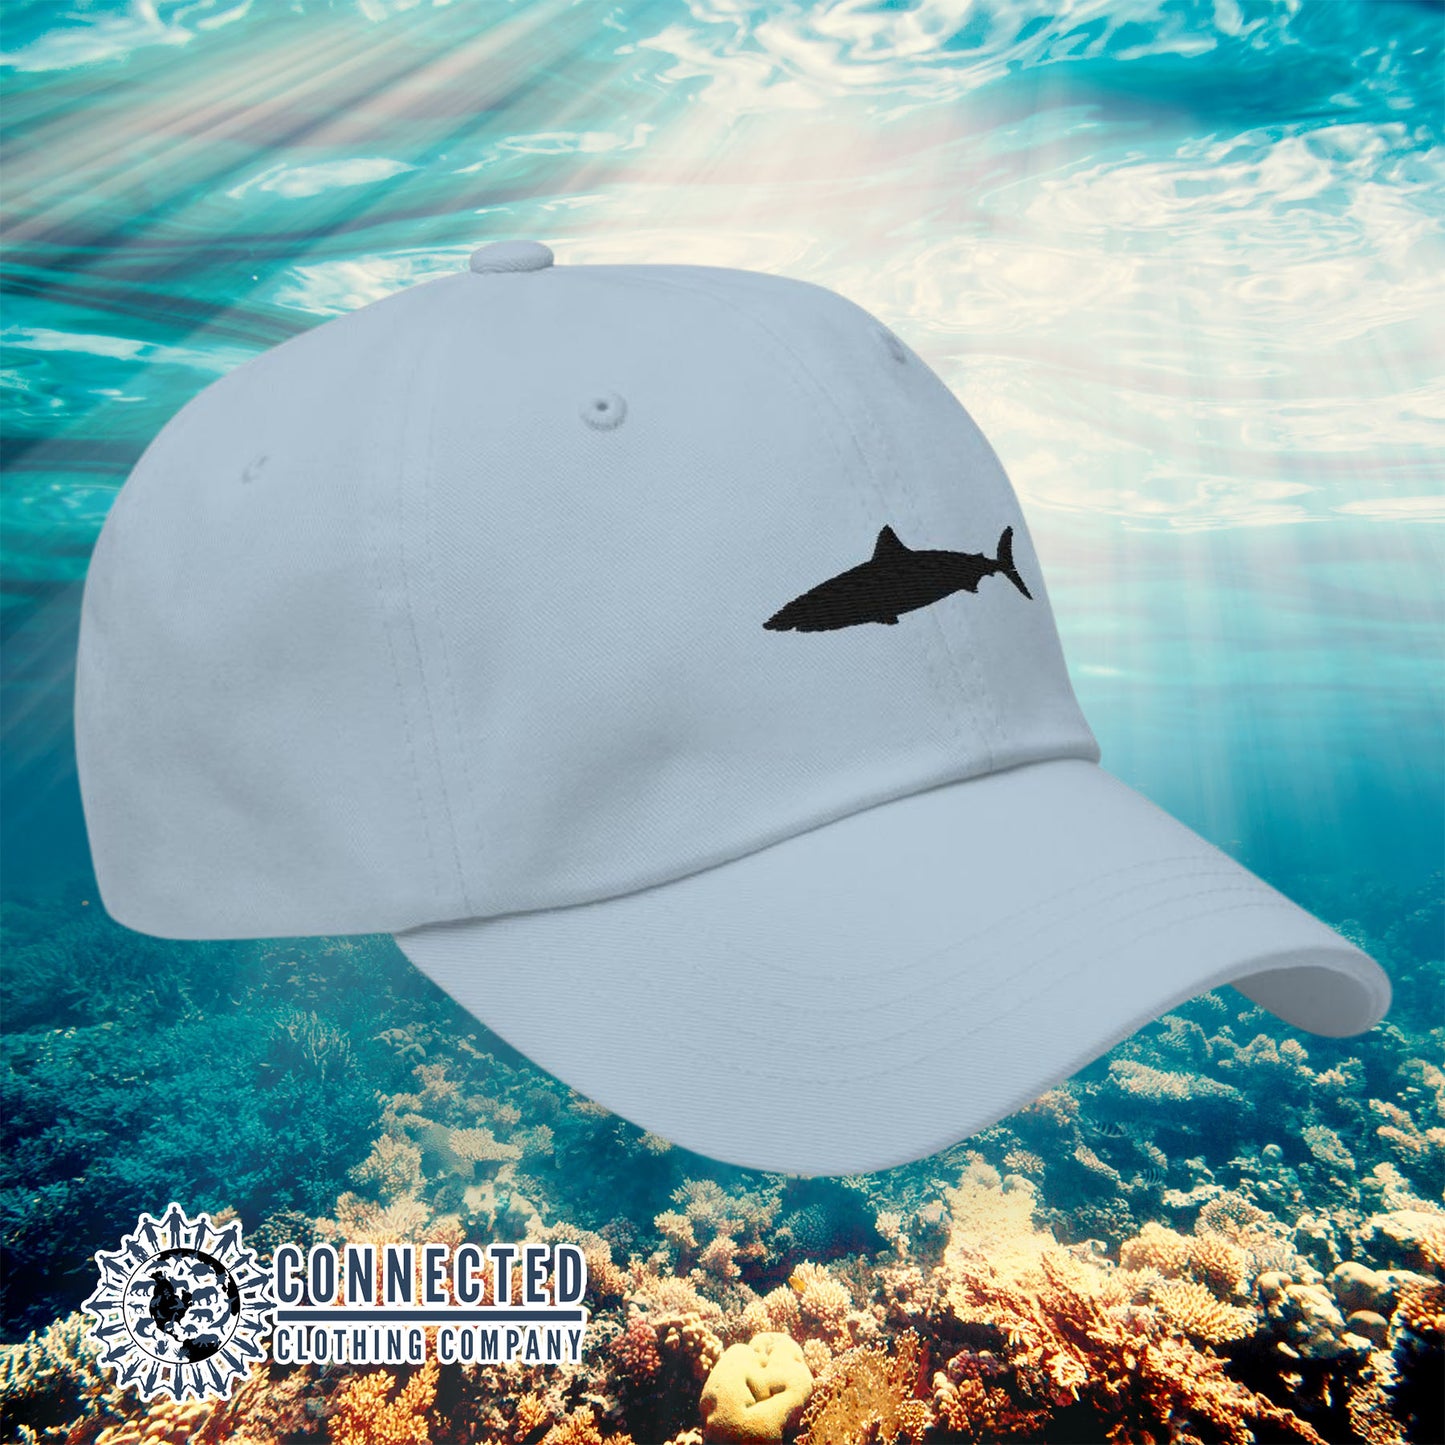 Blue Shark Cotton Cap - Connected Clothing Company - Ethical & Sustainable Clothing That Gives Back - 10% donated to Oceana shark conservation